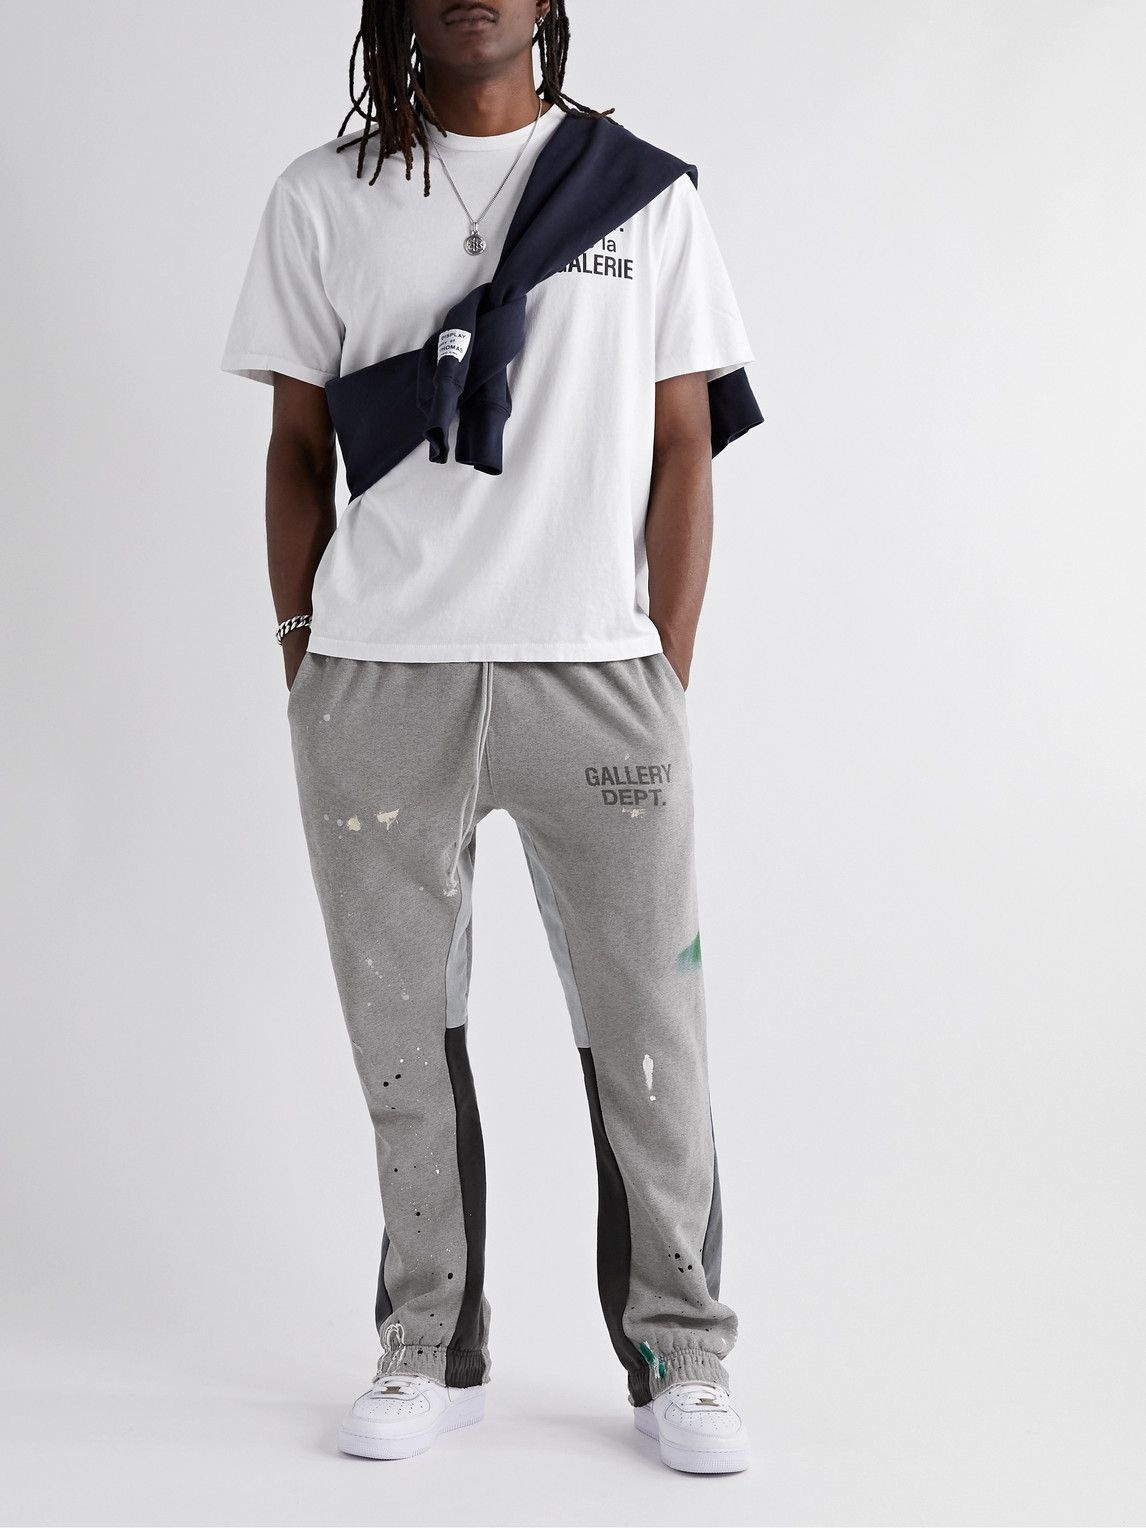 Gallery Dept. Painted Flare Sweatpant 'Grey